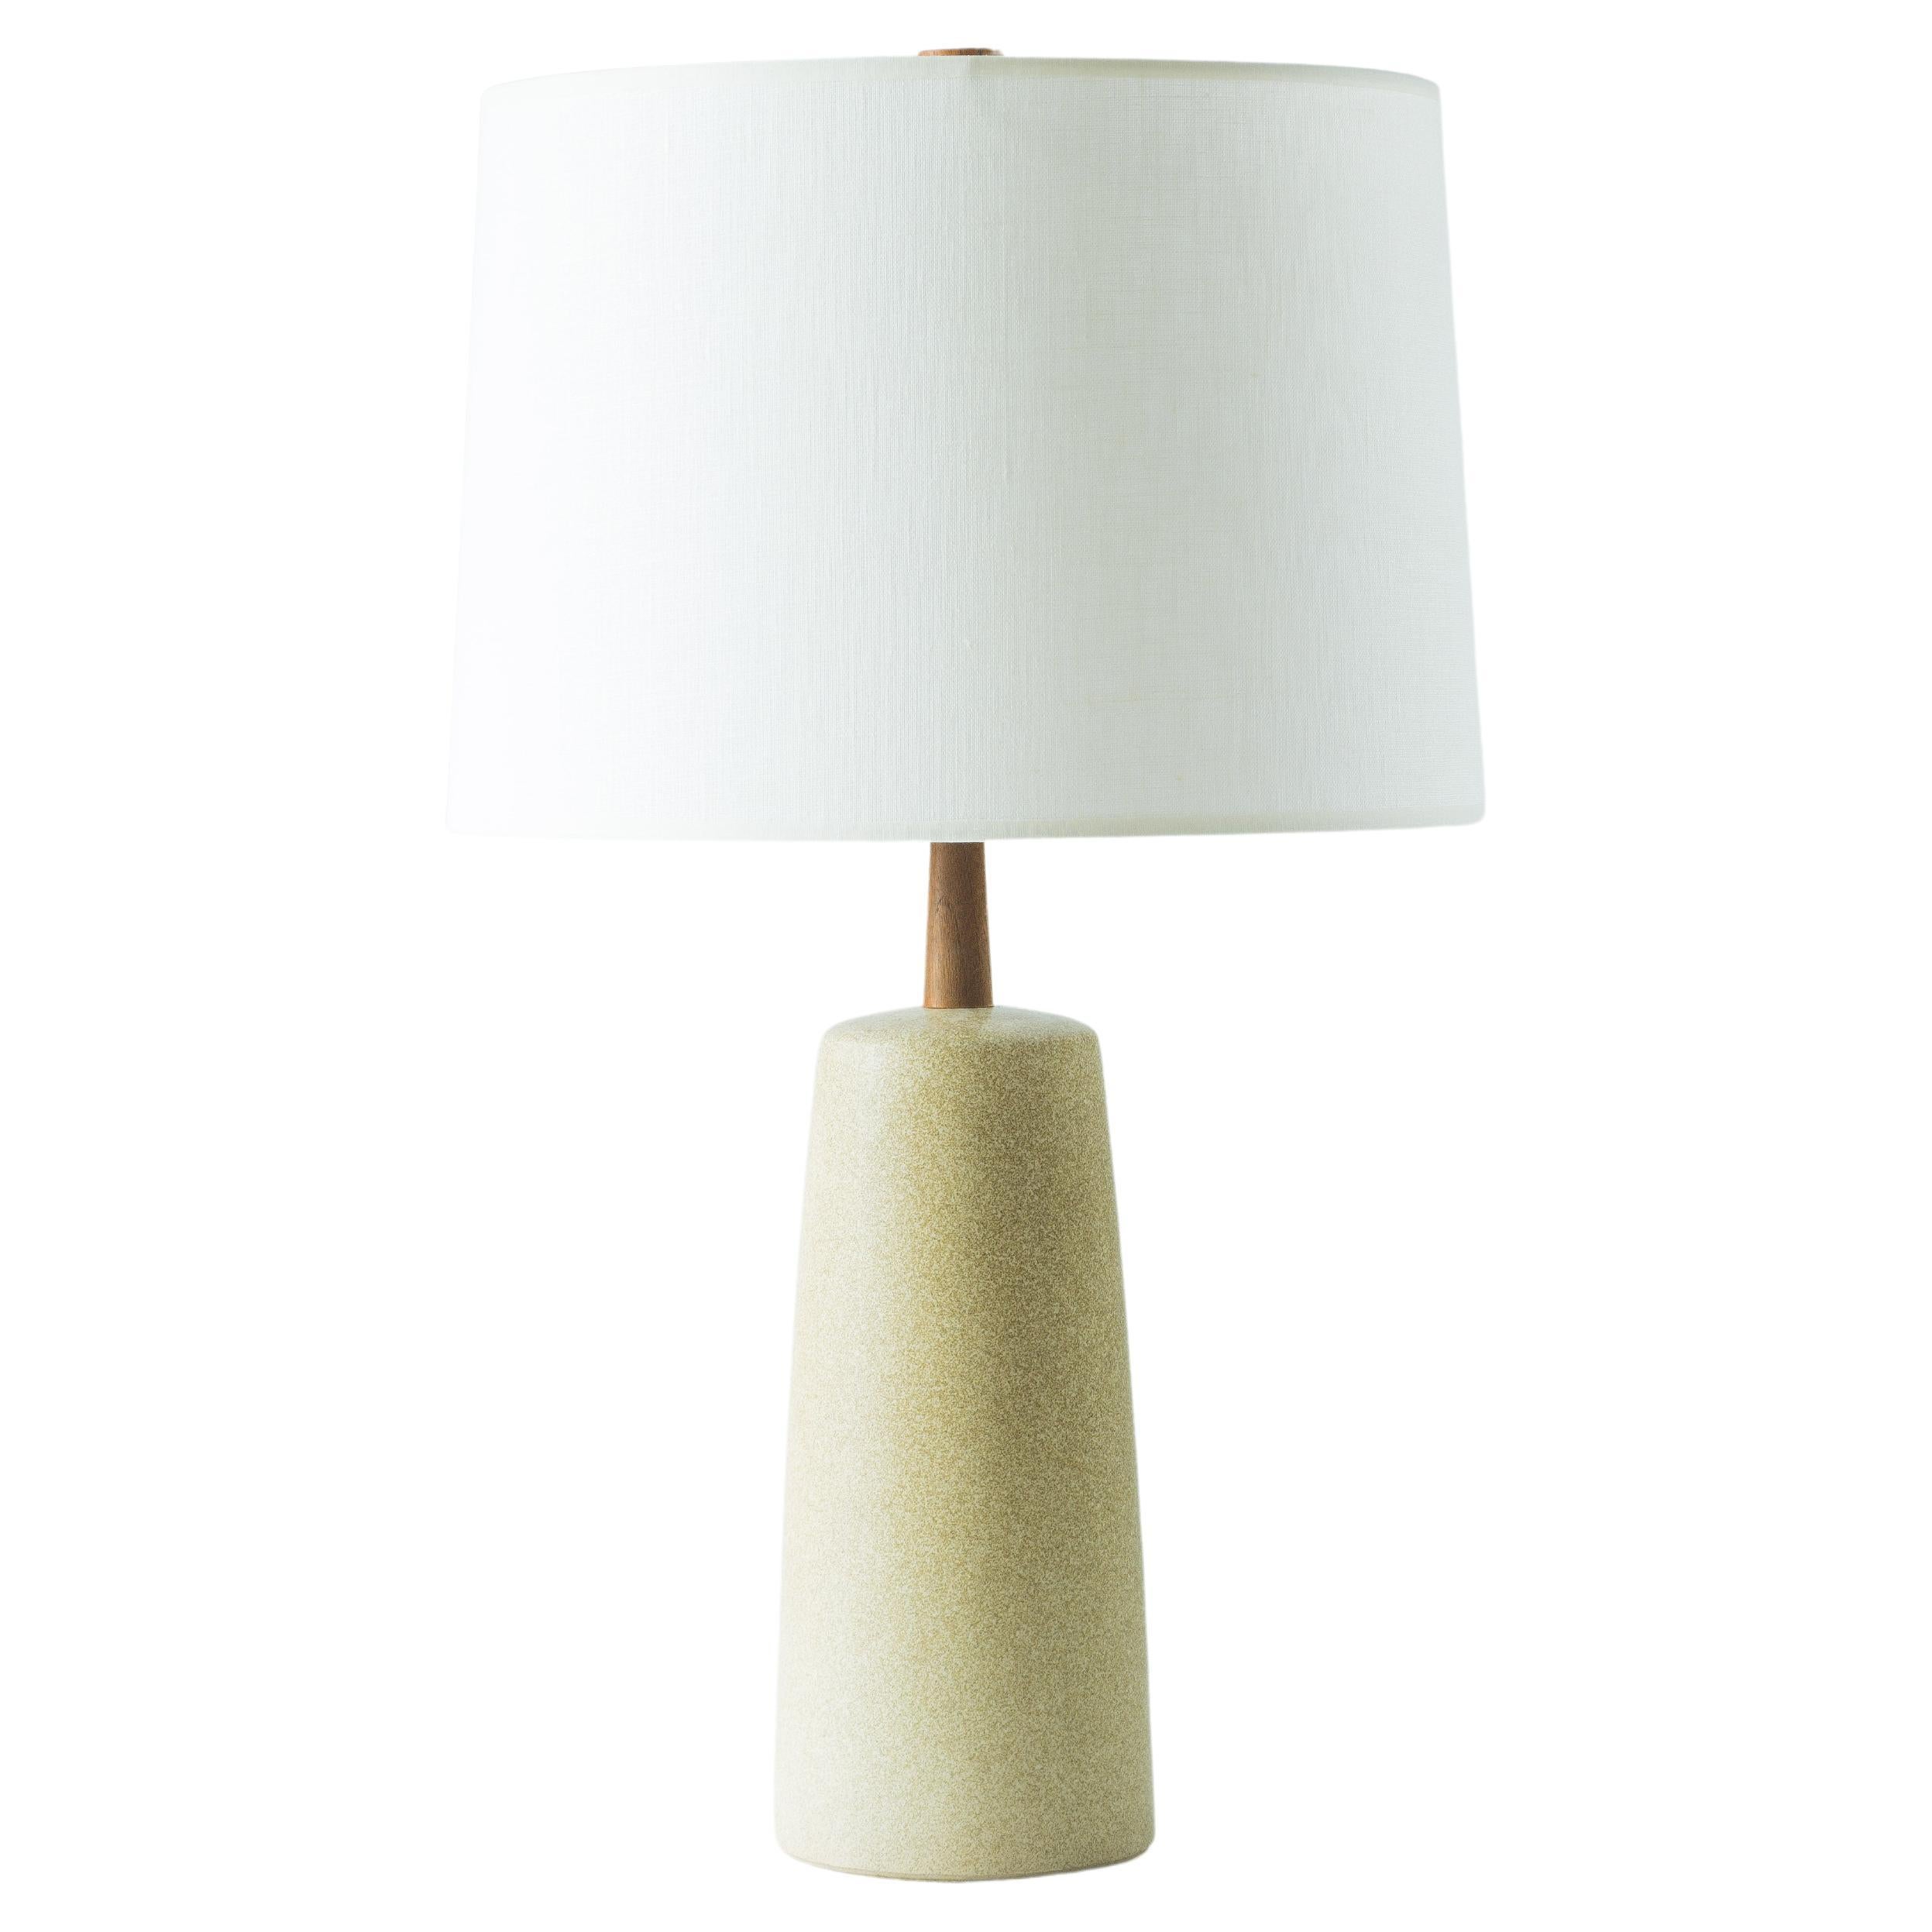 What is it?
—
Another gem from the masters of mid century lightning – Gordon and Jane Martz. Not too big, not too small – this ceramic lamp is equally at home on an end table or credenza as it is on a dresser or bedside table.

This signed Martz